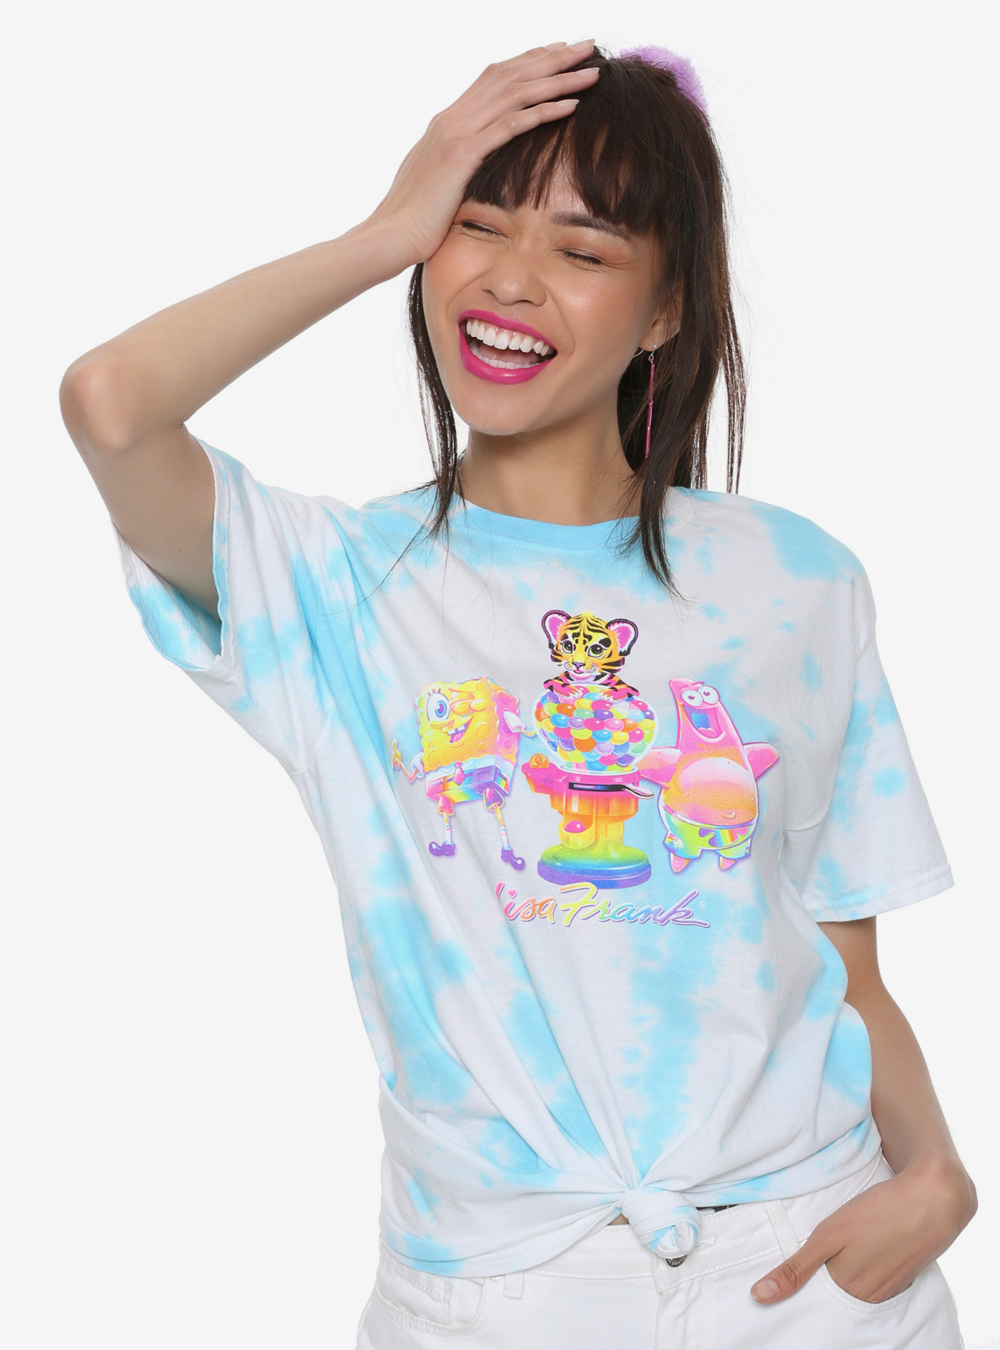 Girls Gumball Knotted Tee_$24.90.jpg